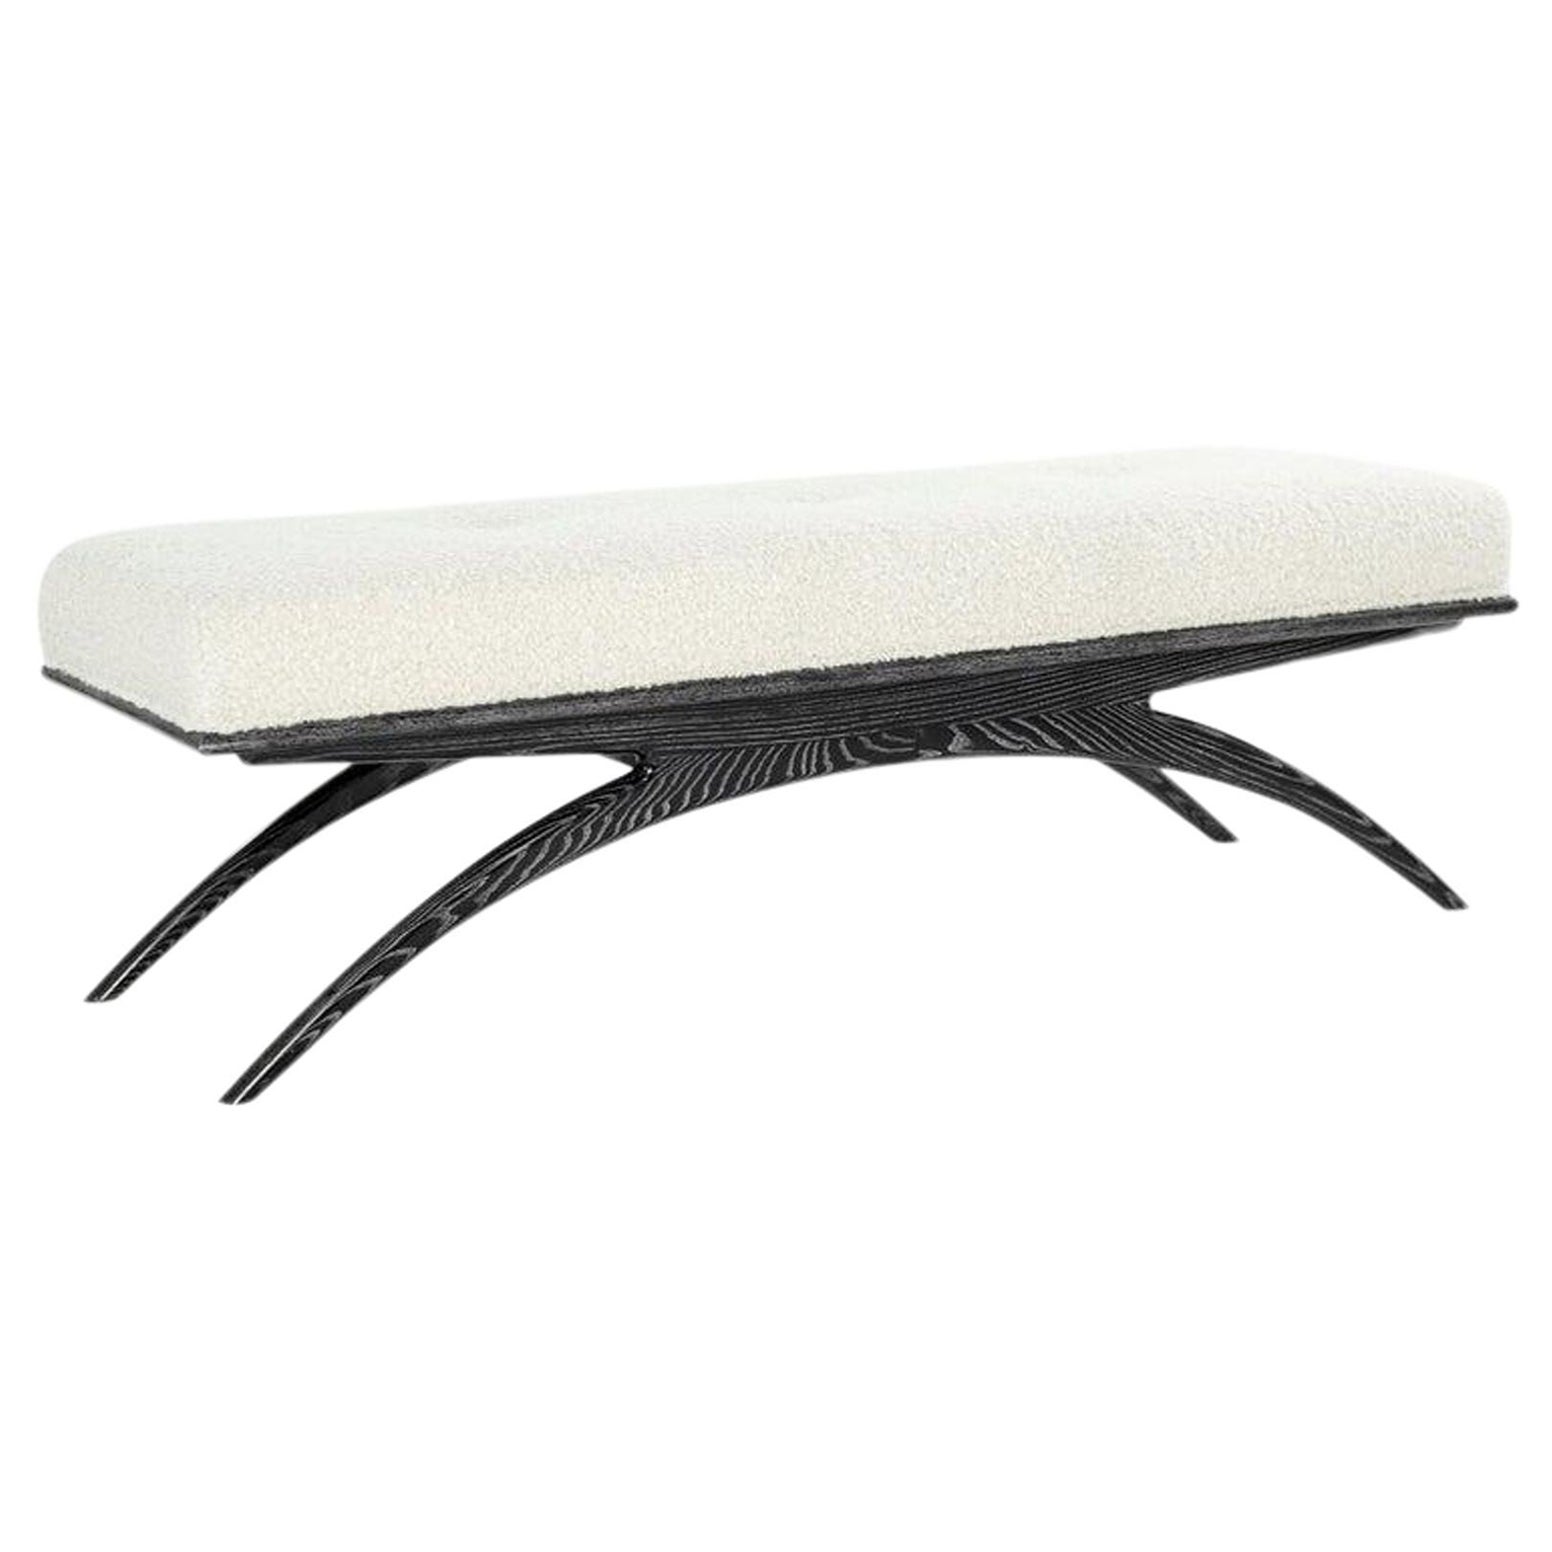 Convex Bench Series 60 in Black Ceruse For Sale